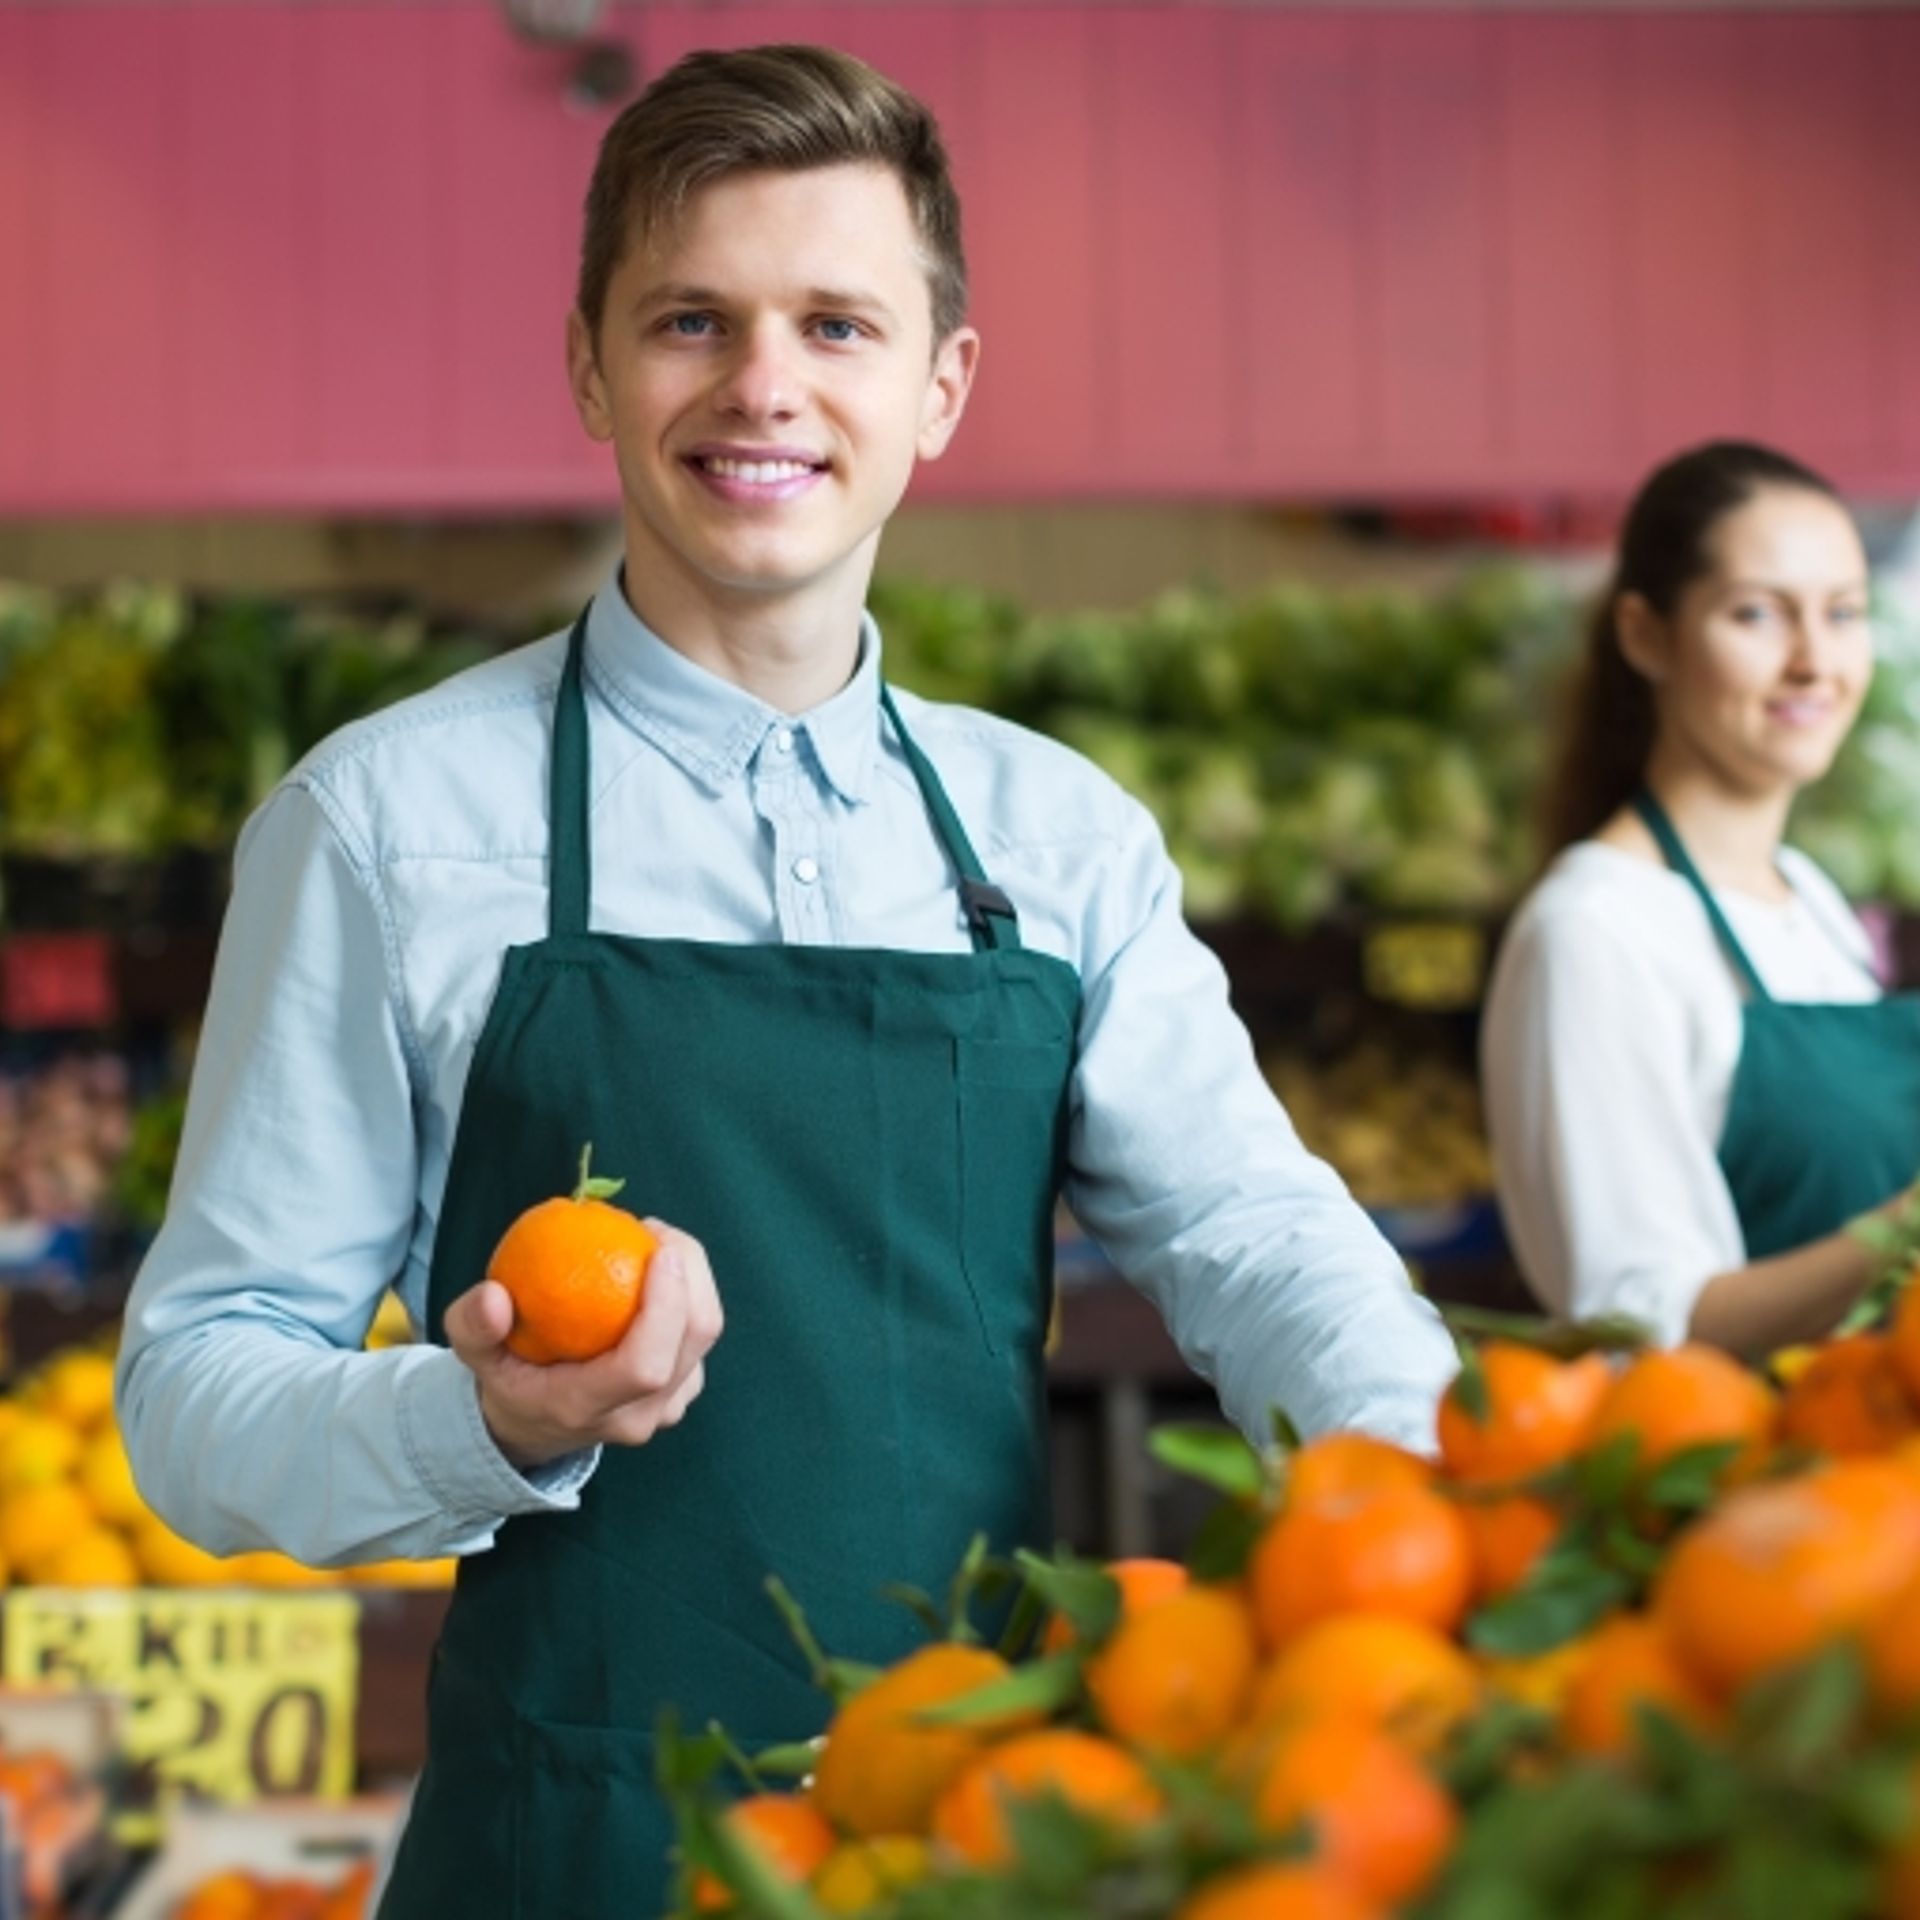 Image of a retail worker displaying fresh fruit products in store